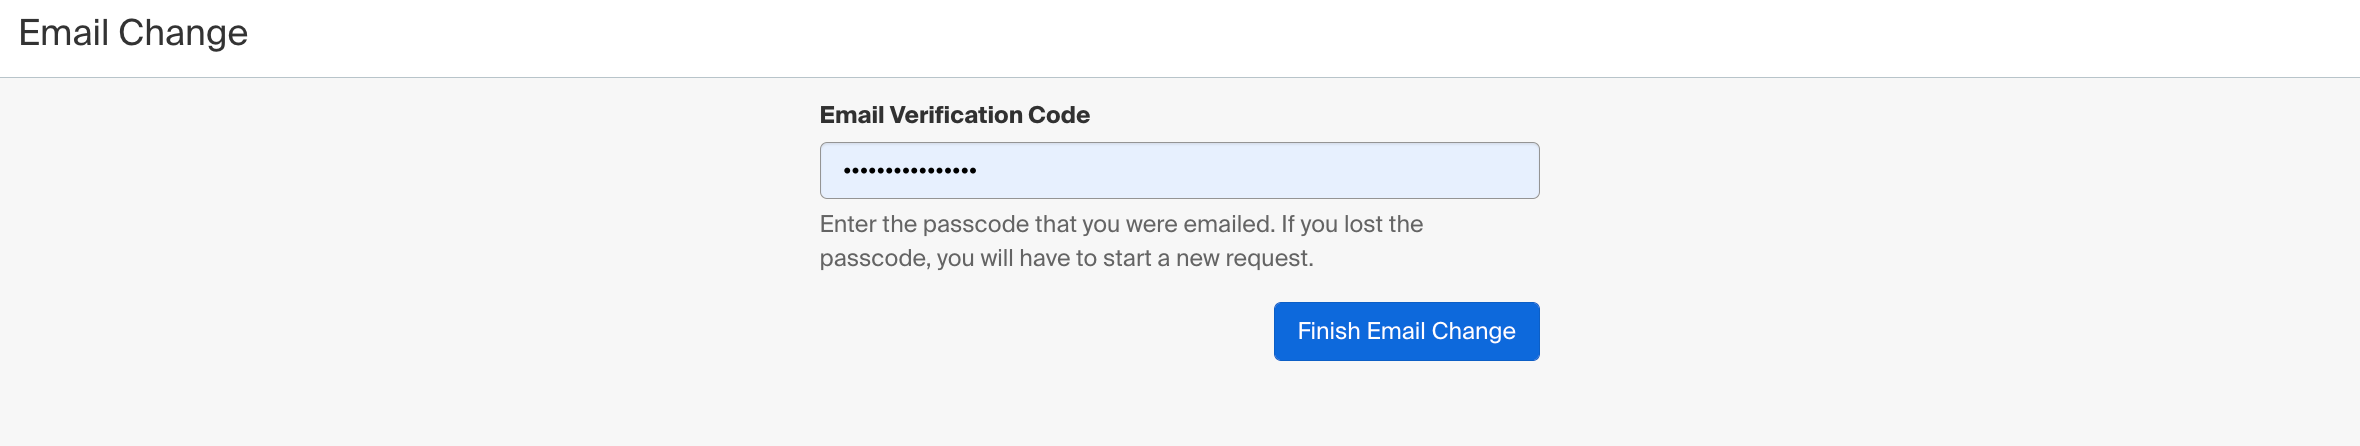 Email_verification_code.png